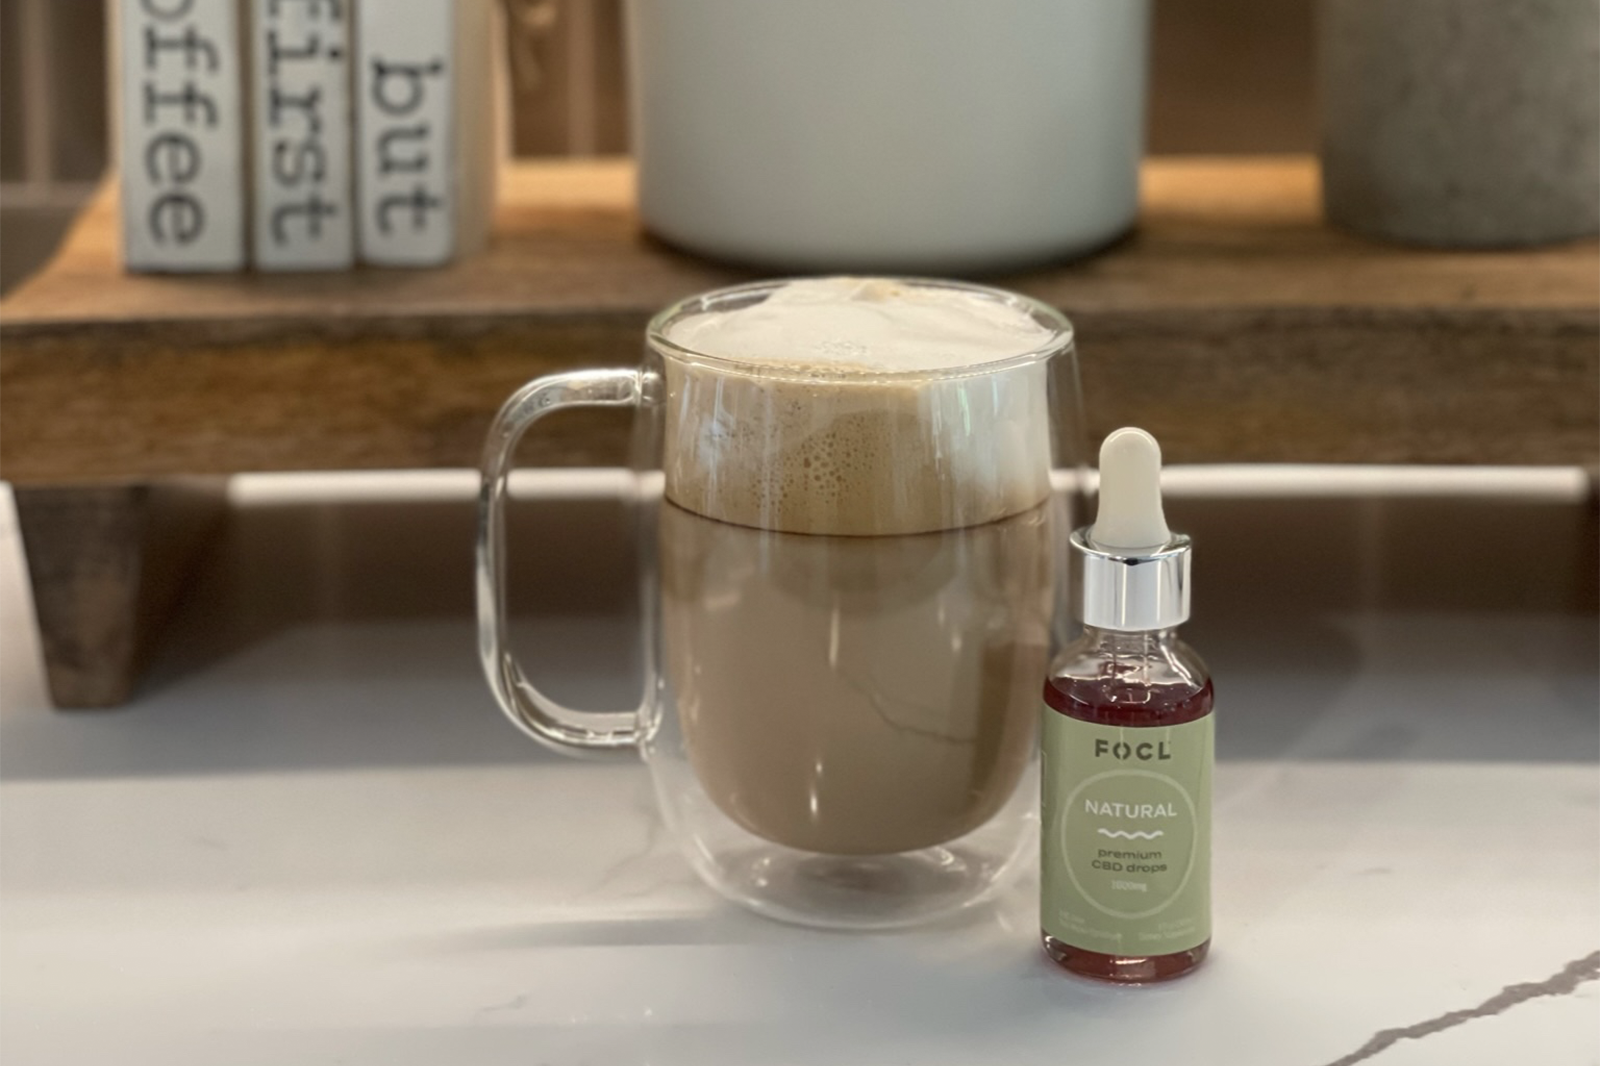 Bottle of FOCL Premium CBD Drops next to a cup of cocoa in front of a bookshelf.